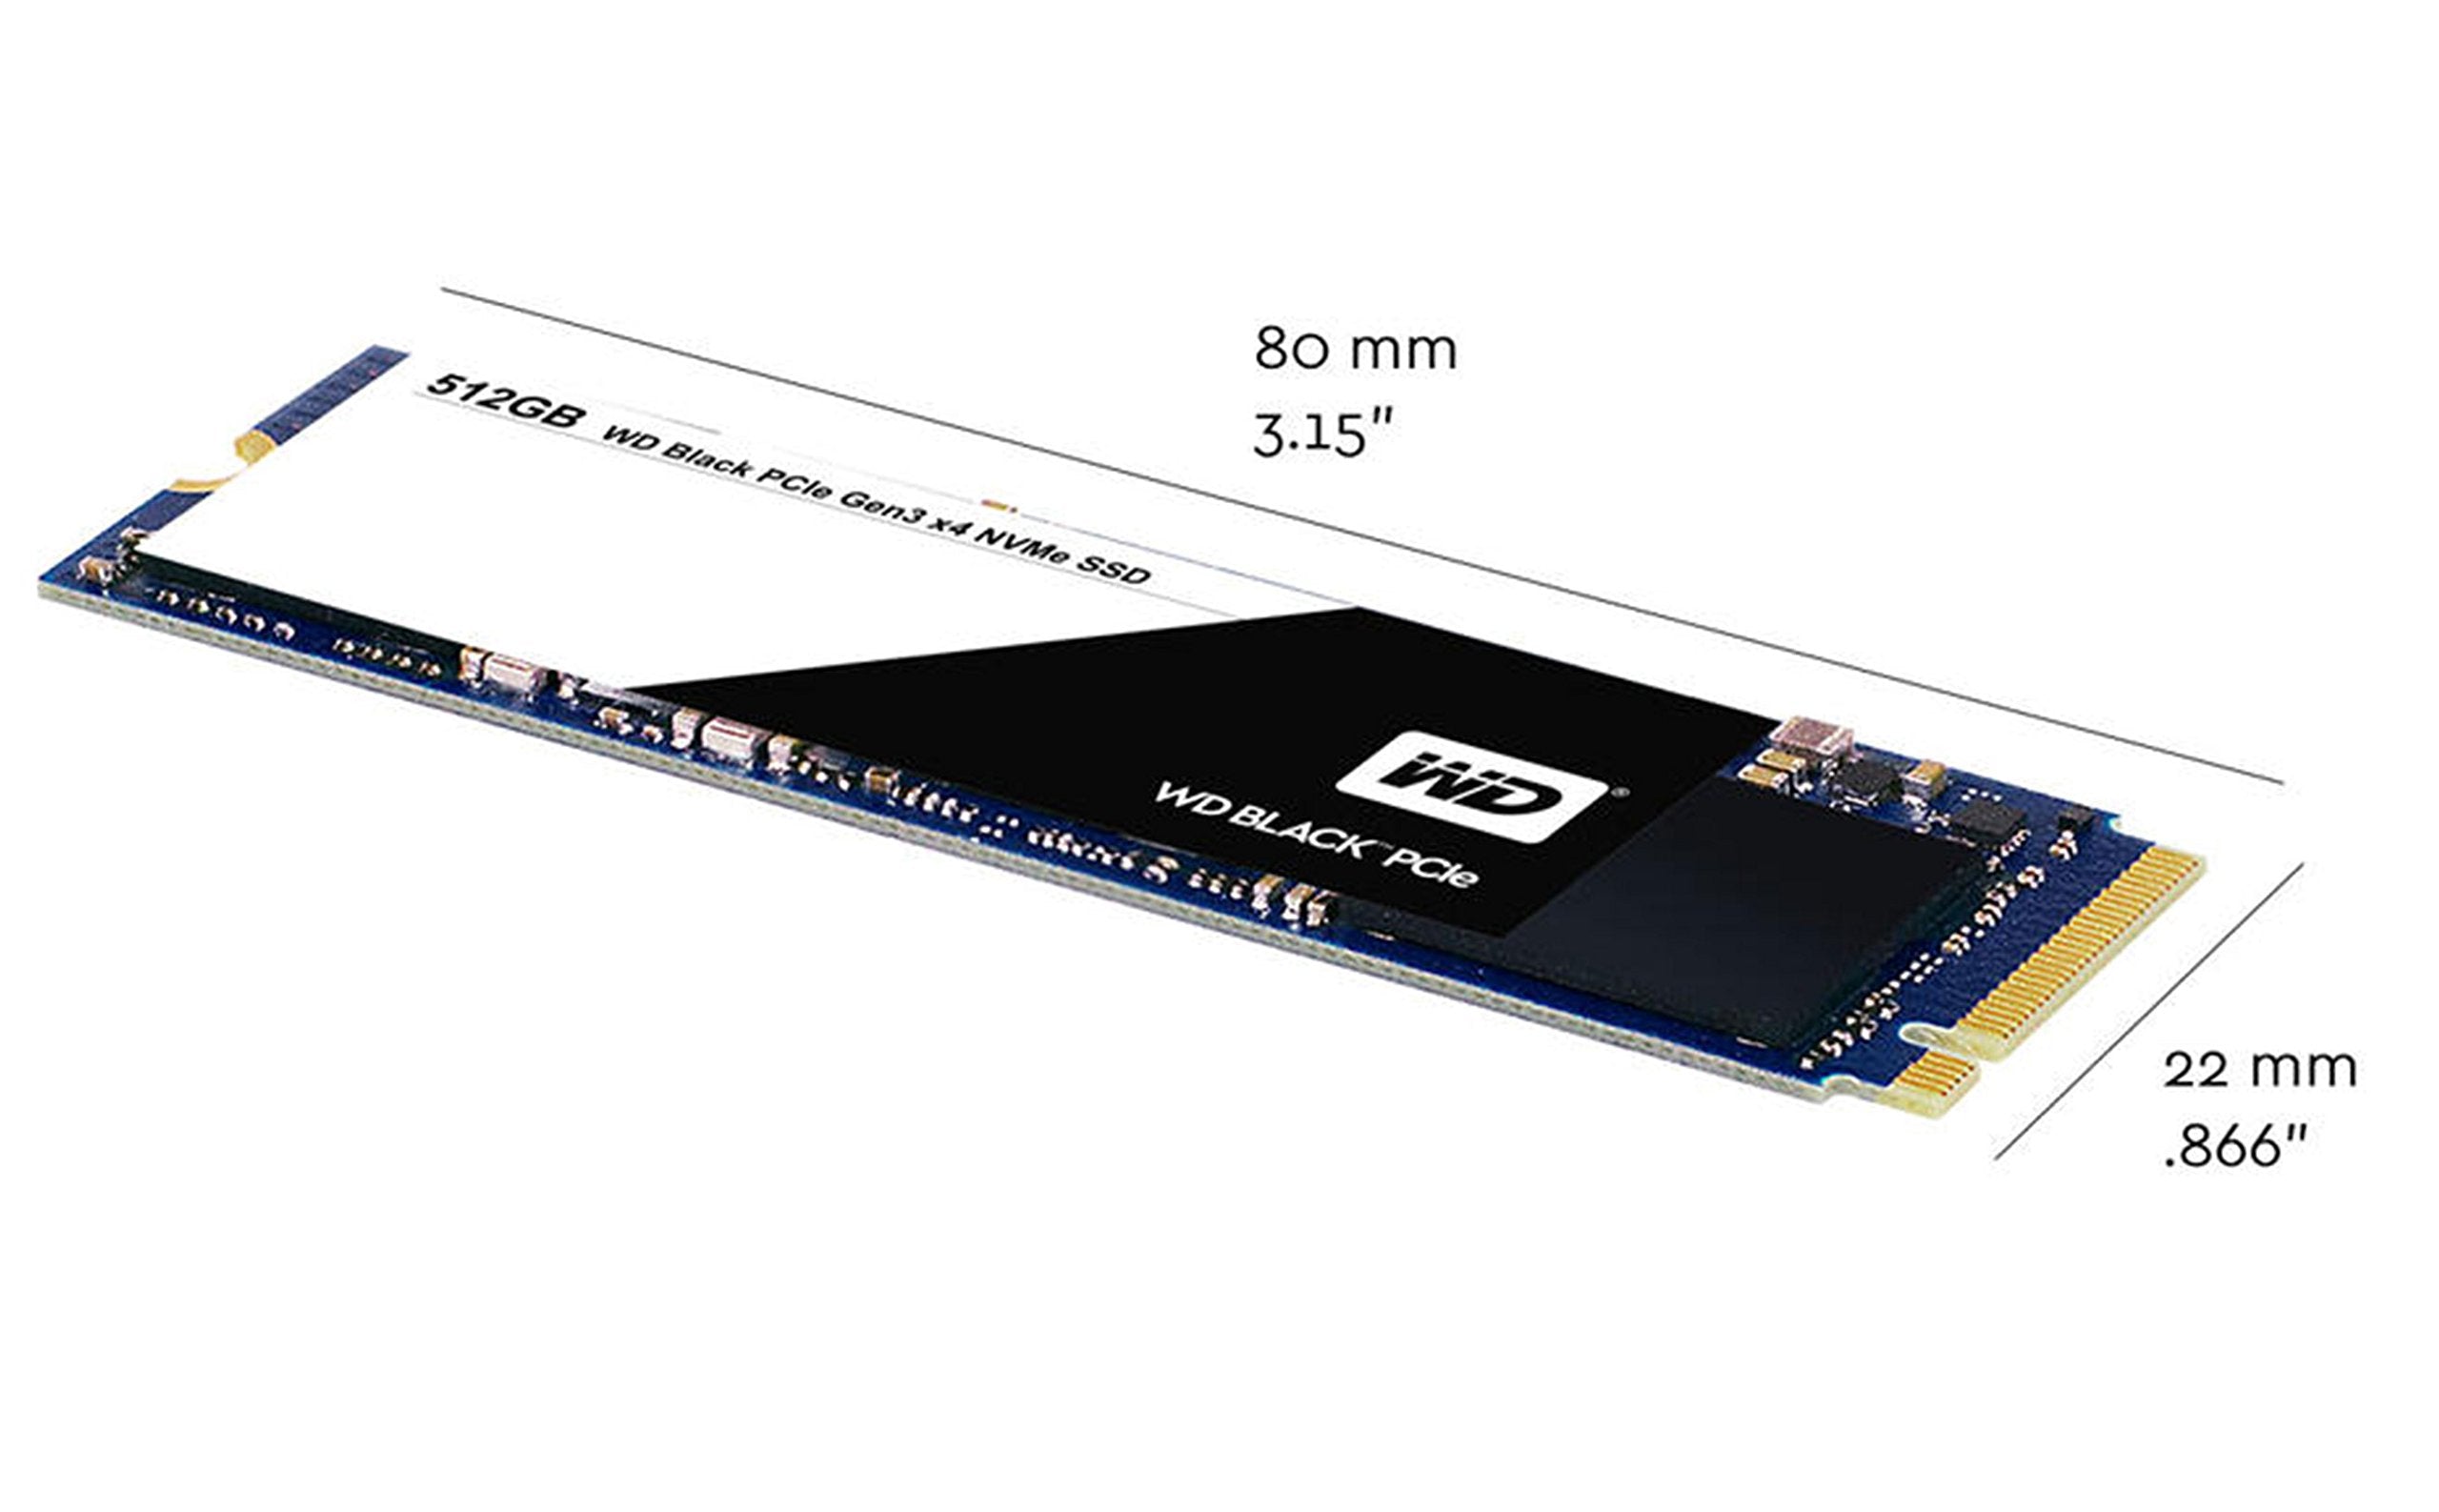 WD Black 256GB Performance SSD - 8 Gb/s M.2 PCIe NVMe Solid State Drive – WDS256G1X0C (Open Box, Like New)